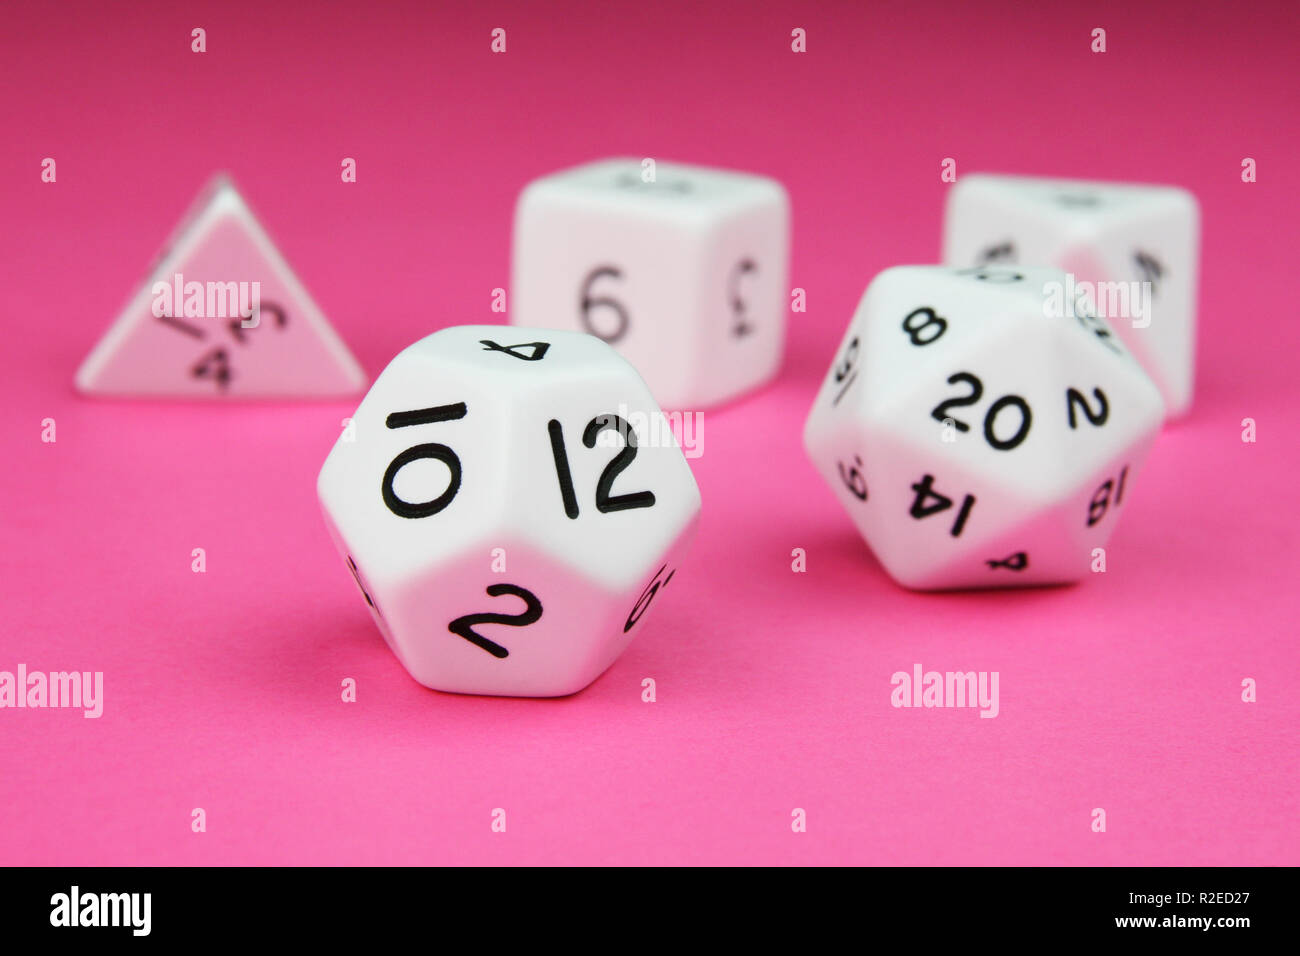 Set of white complete regular platonic solid dice on a pink background Stock Photo